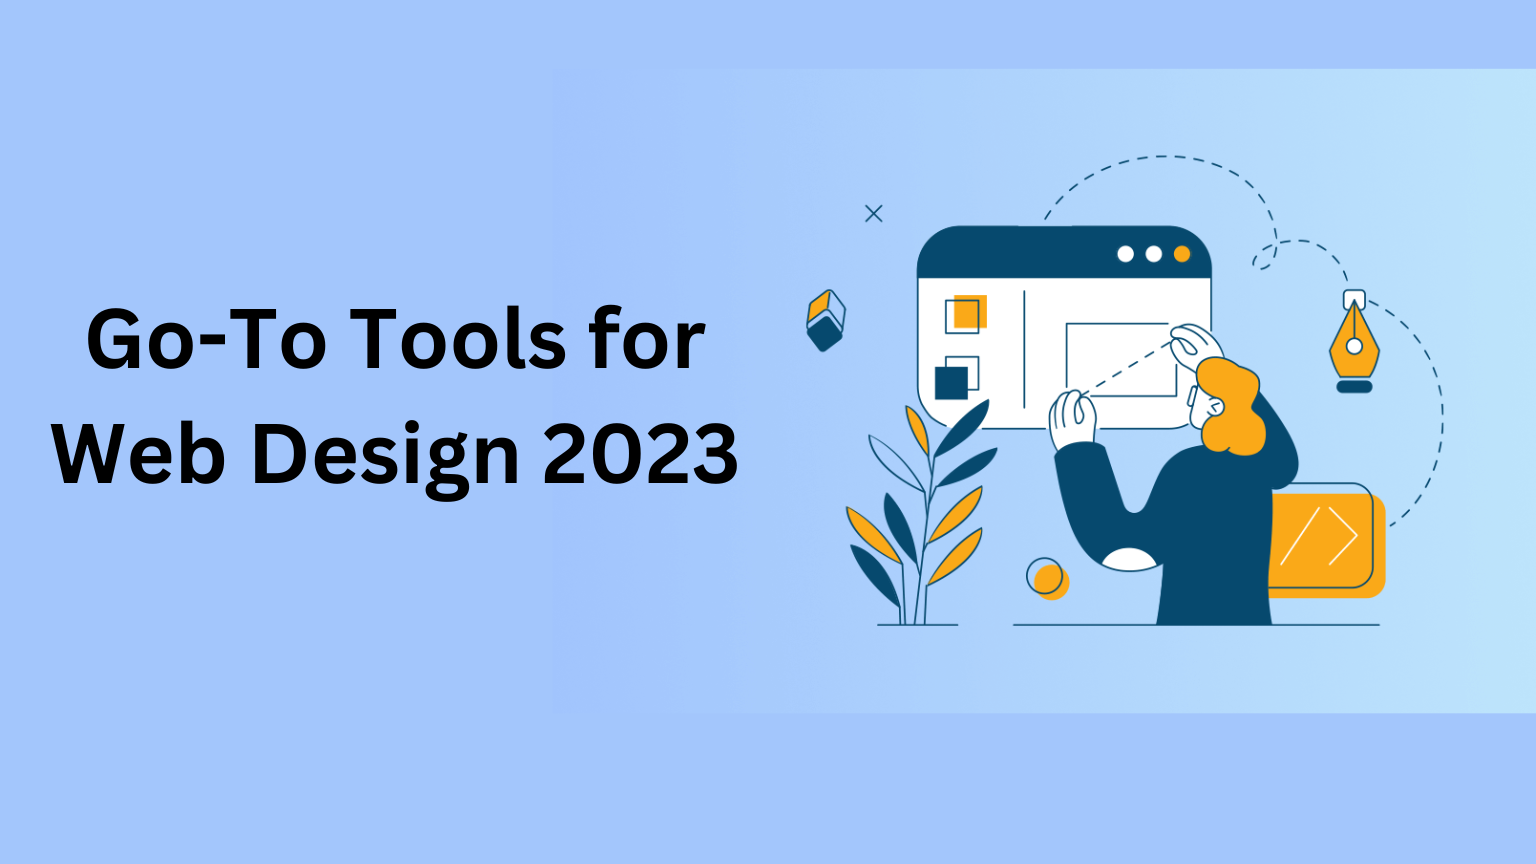 Go-To Tools for Web Design 2023